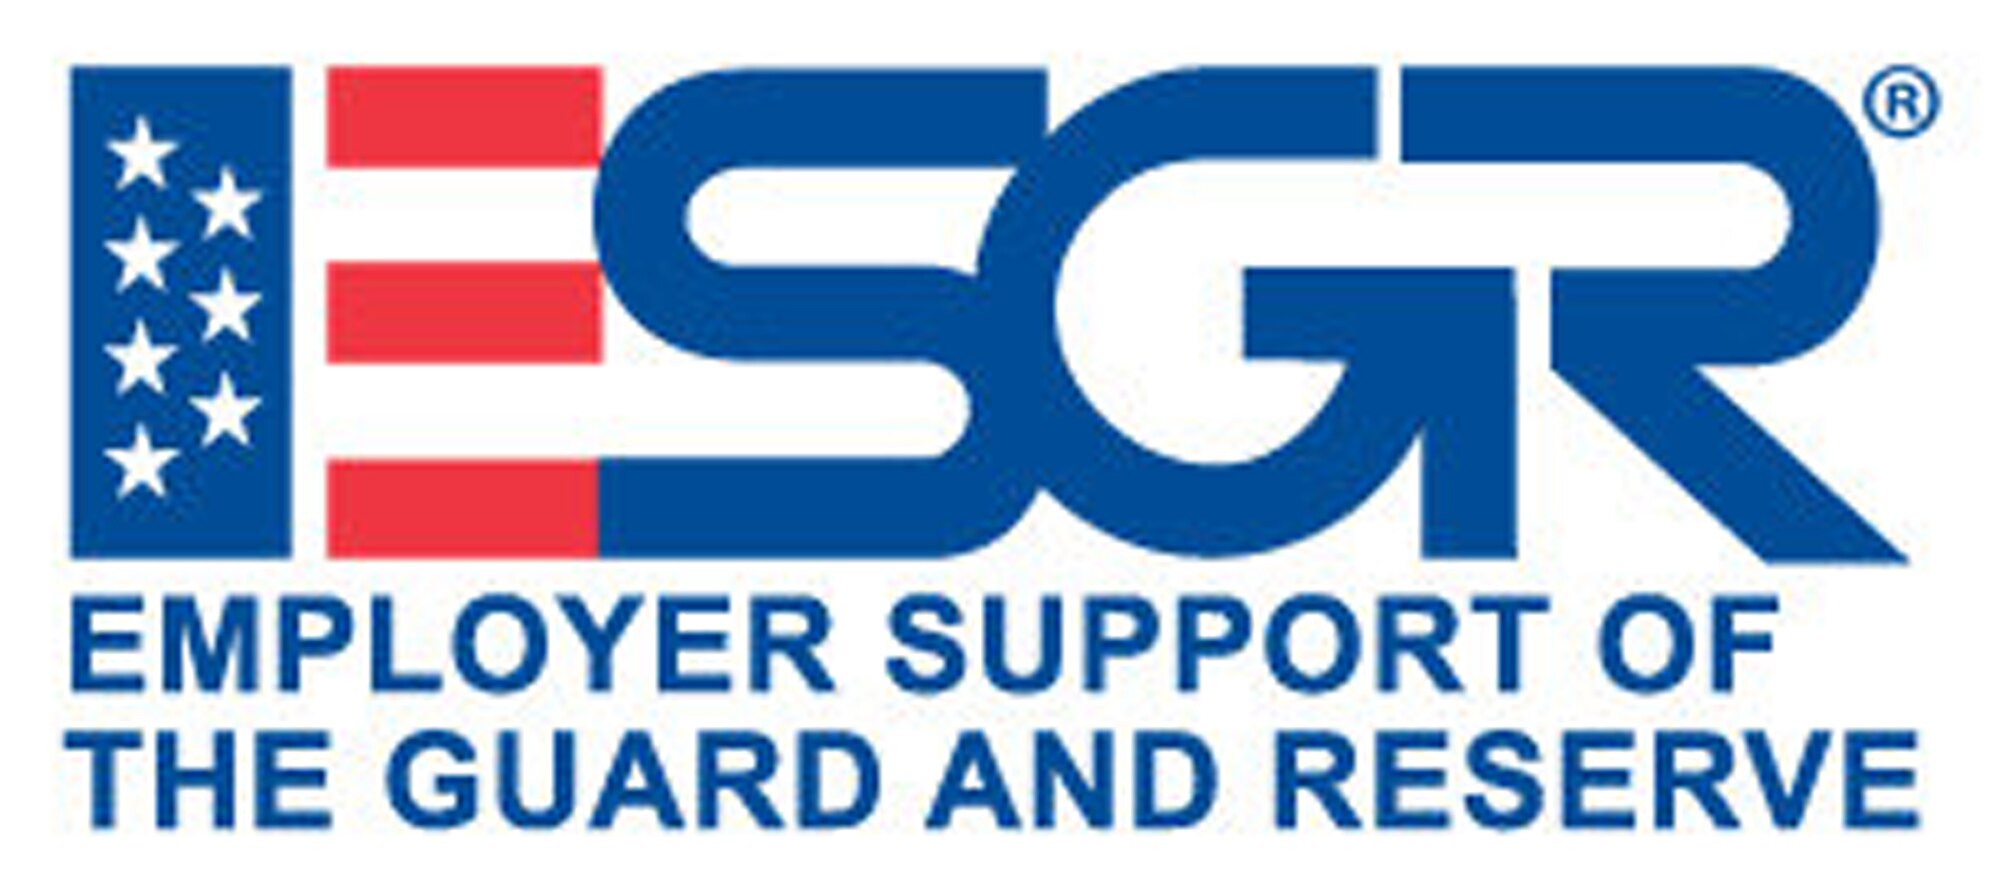 Employer Support of the Guard and Reserve (ESGR), a Department of Defense agency, encourages Guard and Reserve members to nominate their supportive employers for the 2012 Secretary of Defense Employer Support Freedom Award.